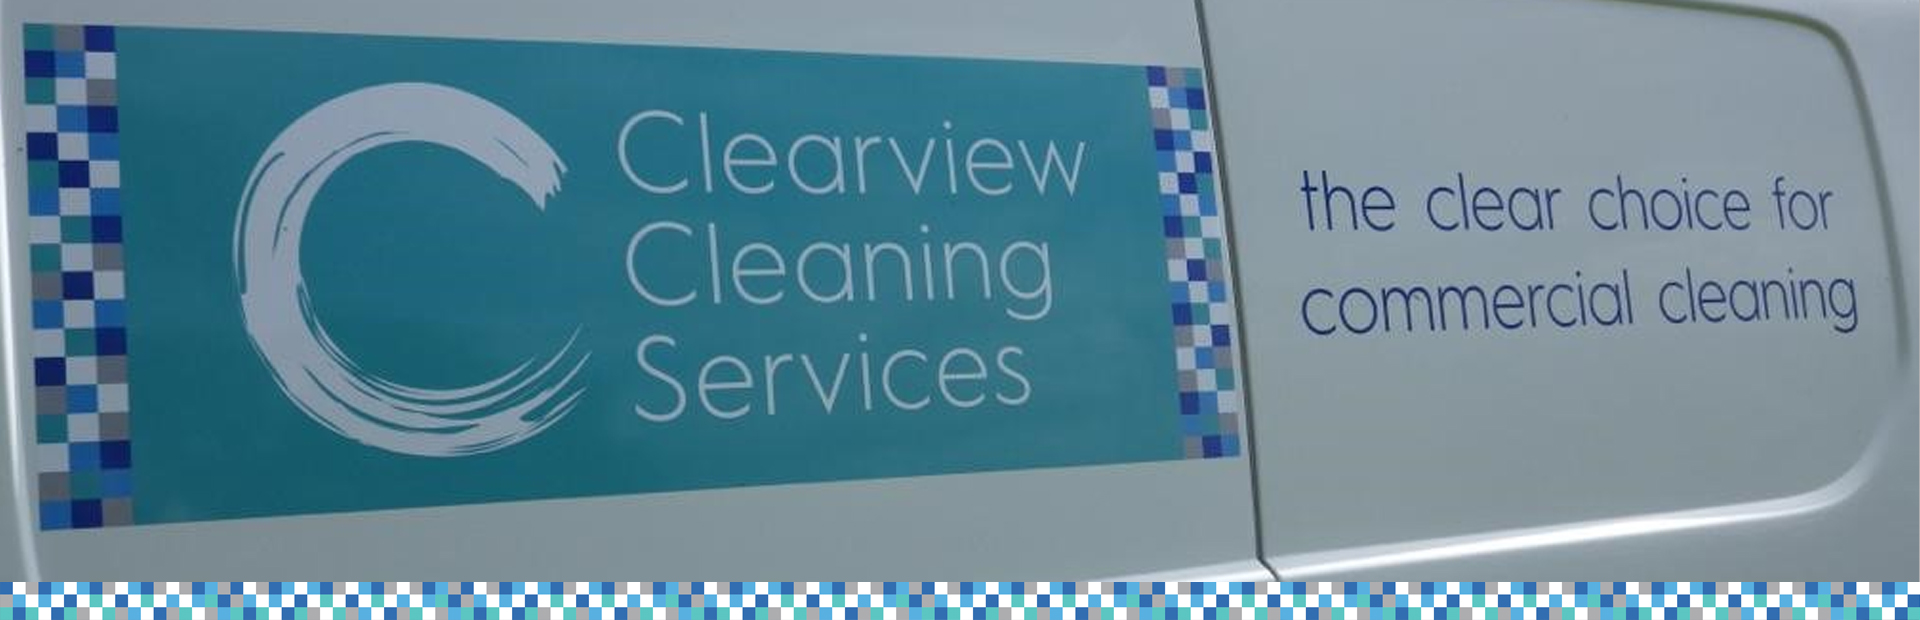 clearview substance abuse services